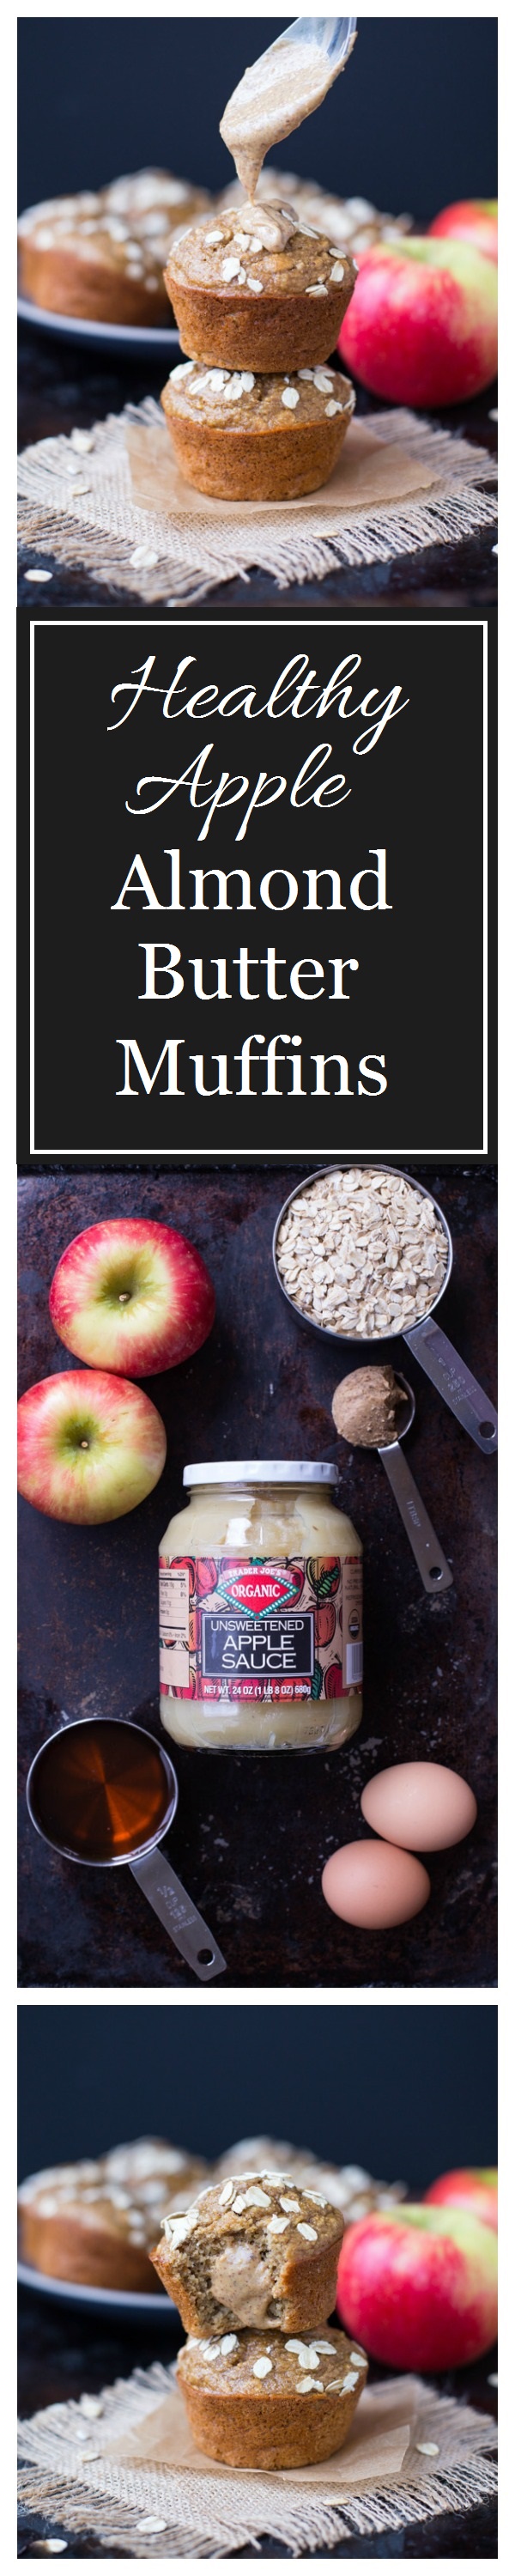 Healthy Apple Almond Butter Muffins- made with whole grain oats, applesauce, fresh apples and almond butter. Only 168 calories per muffin! #glutenfree #dairyfree